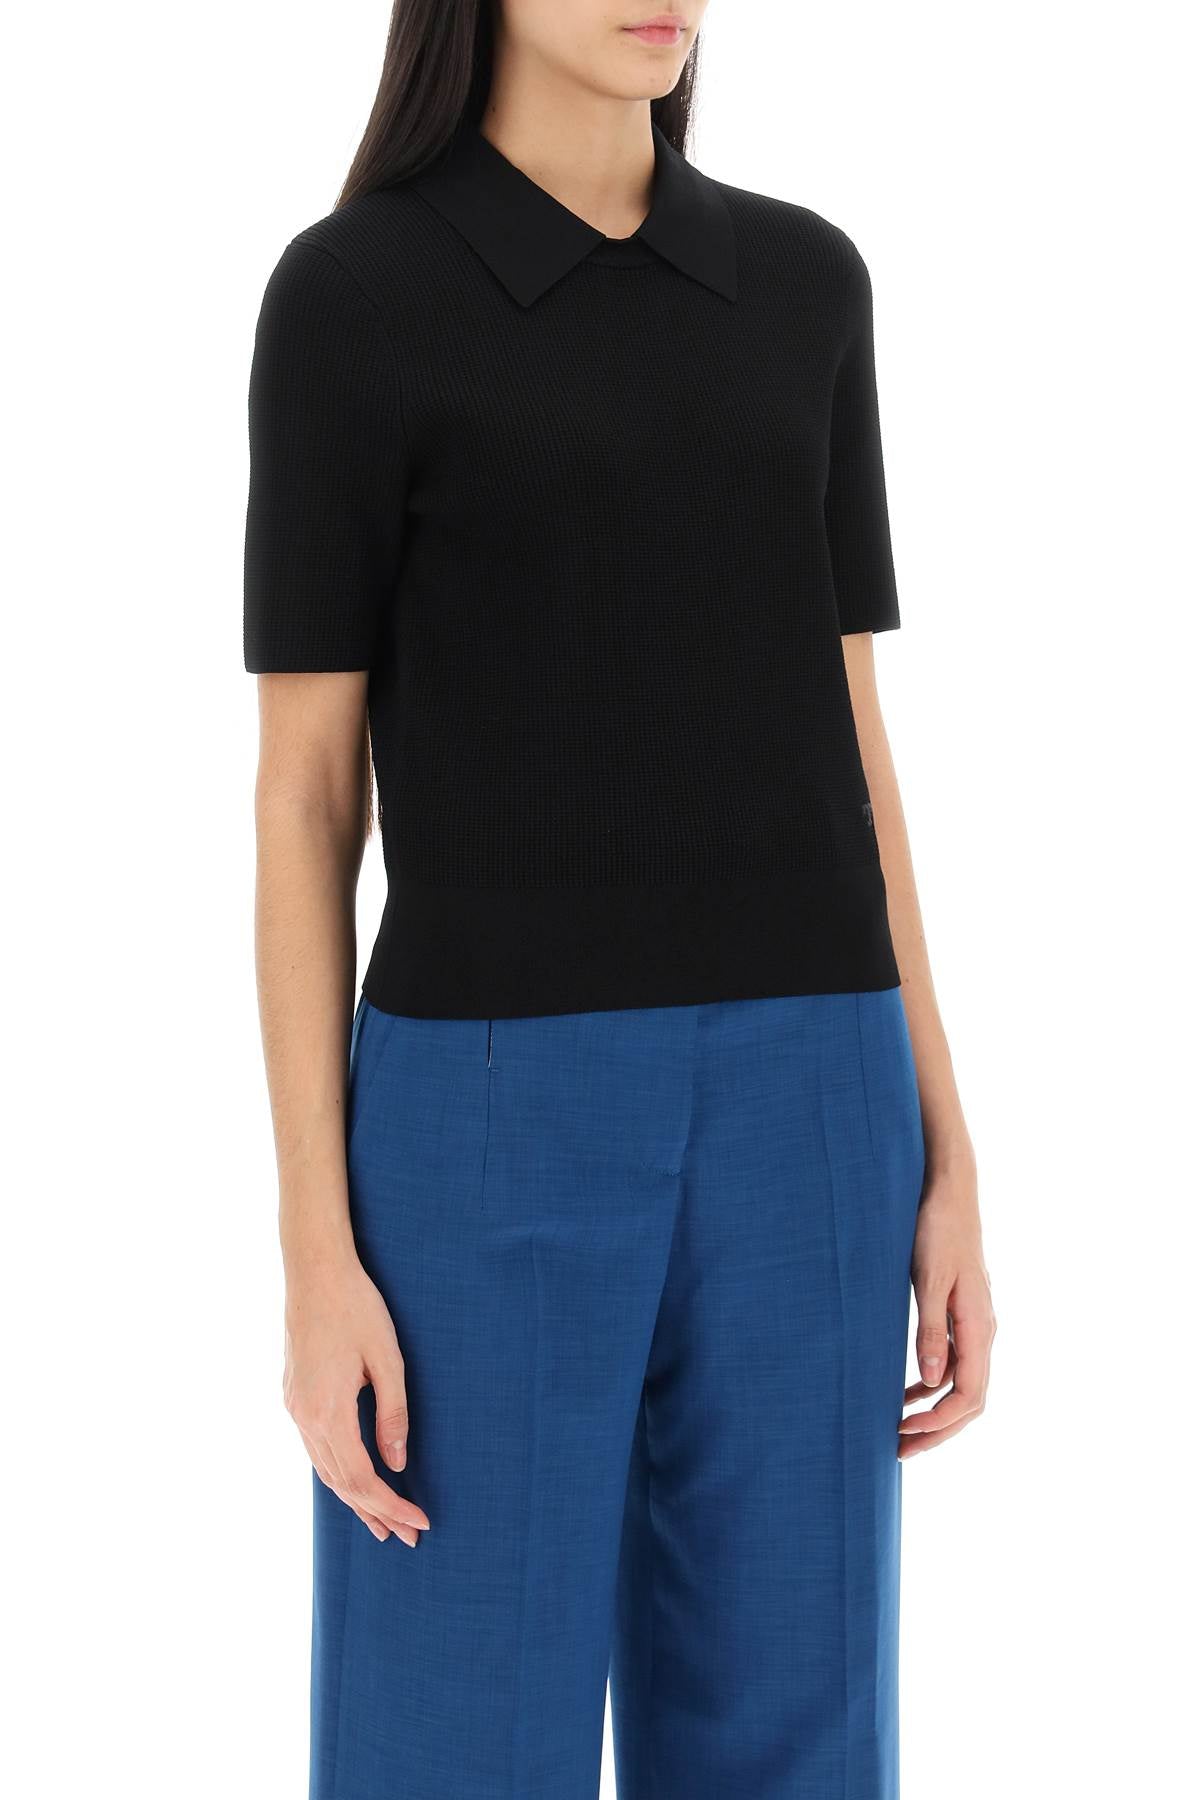 Tory burch knitted polo shirt-1